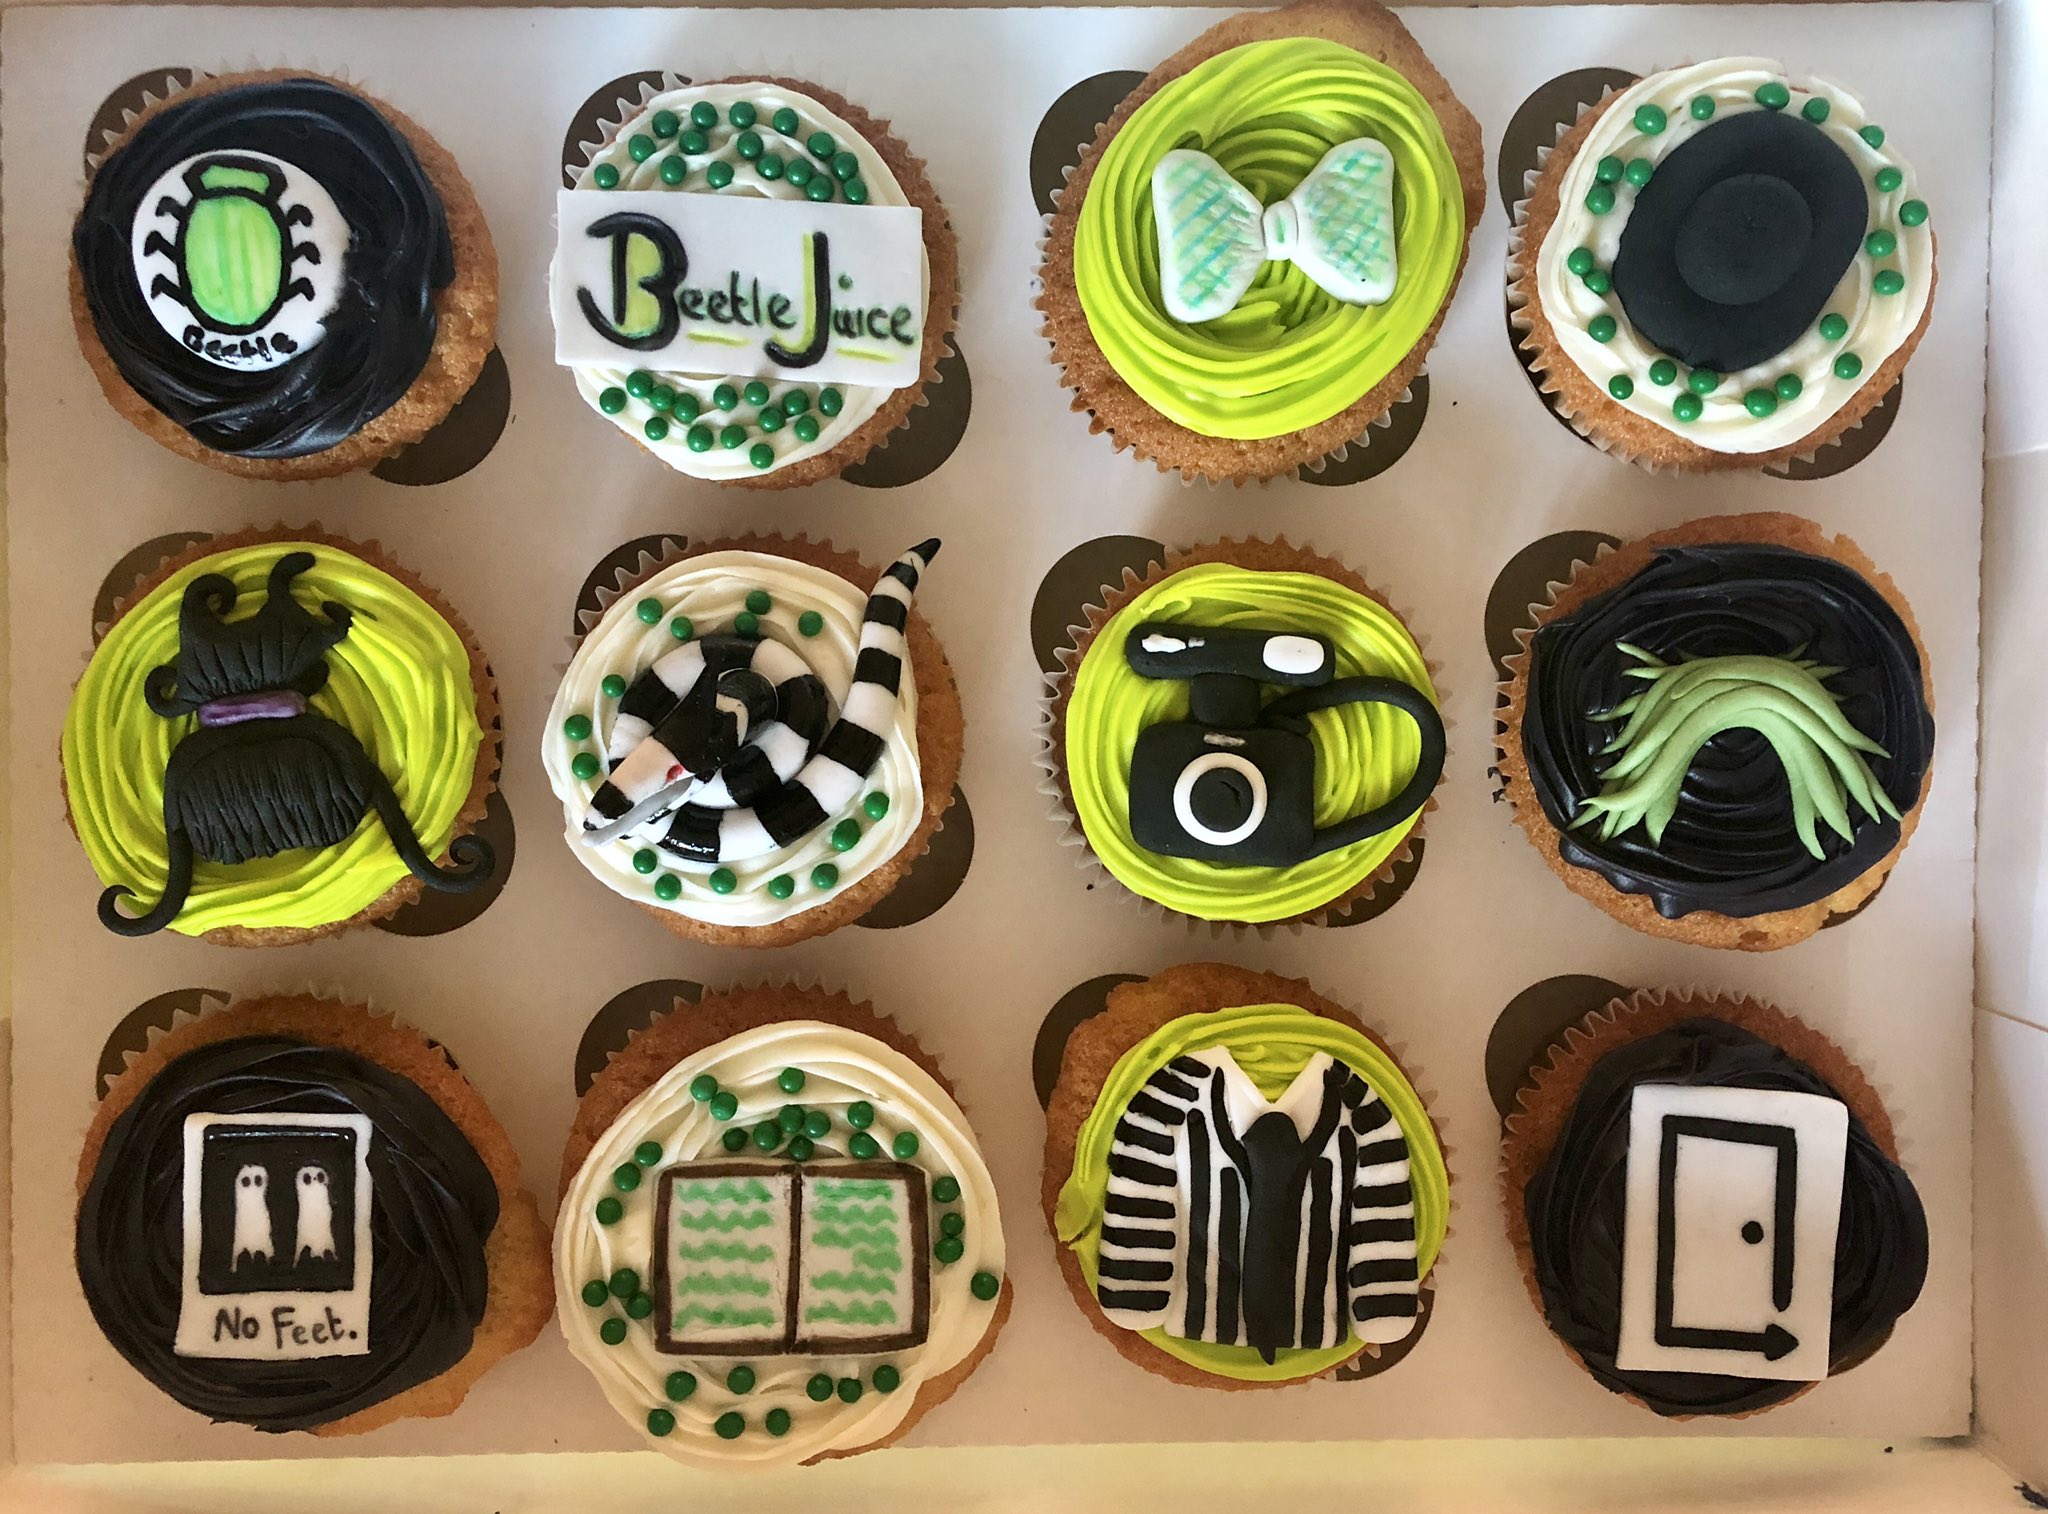 A selection of 90s cupcakes from Bettle Juice